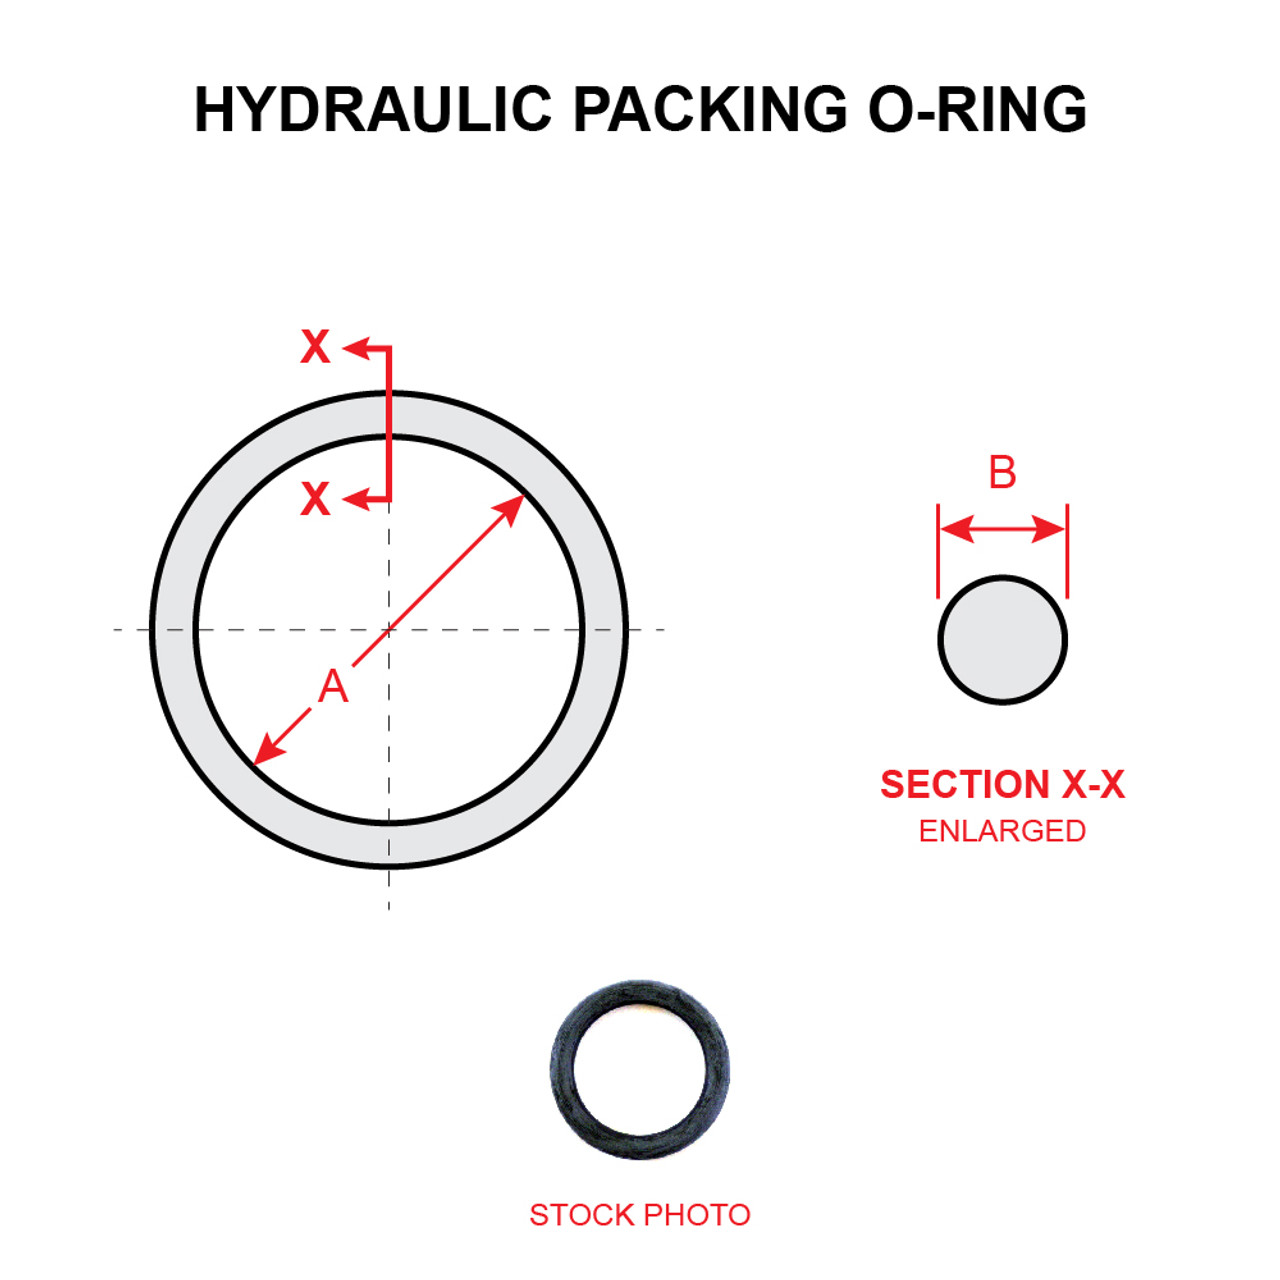 MS28775-229   HYDRAULIC PACKING O-RING